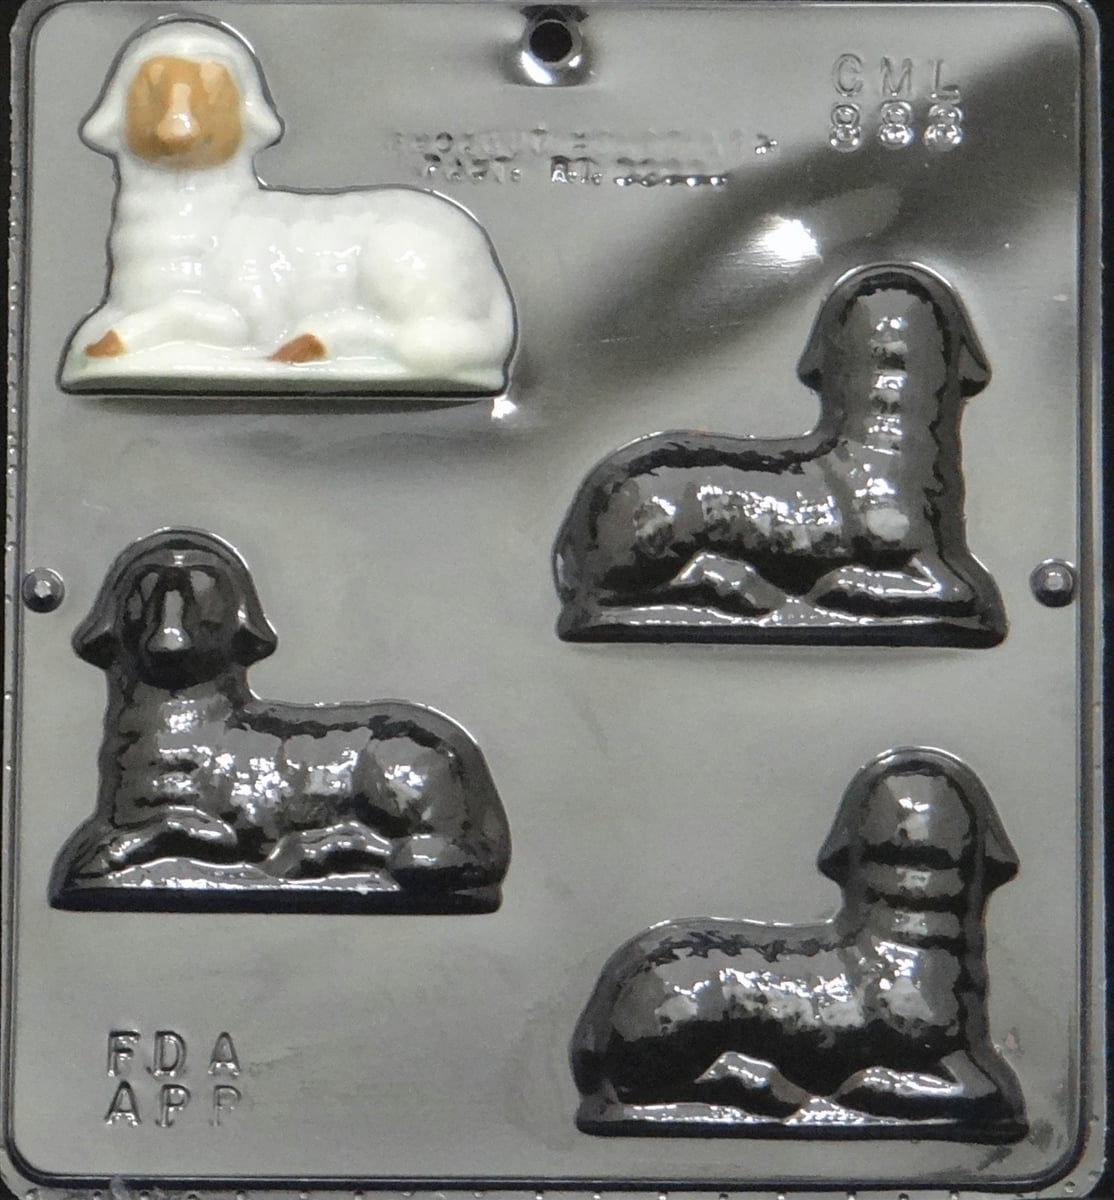 Chocolate World 1903 Polycarbonate Chocolate Mold Frank Haasnoot Praline Curve Candy Mould with 21 Cavities